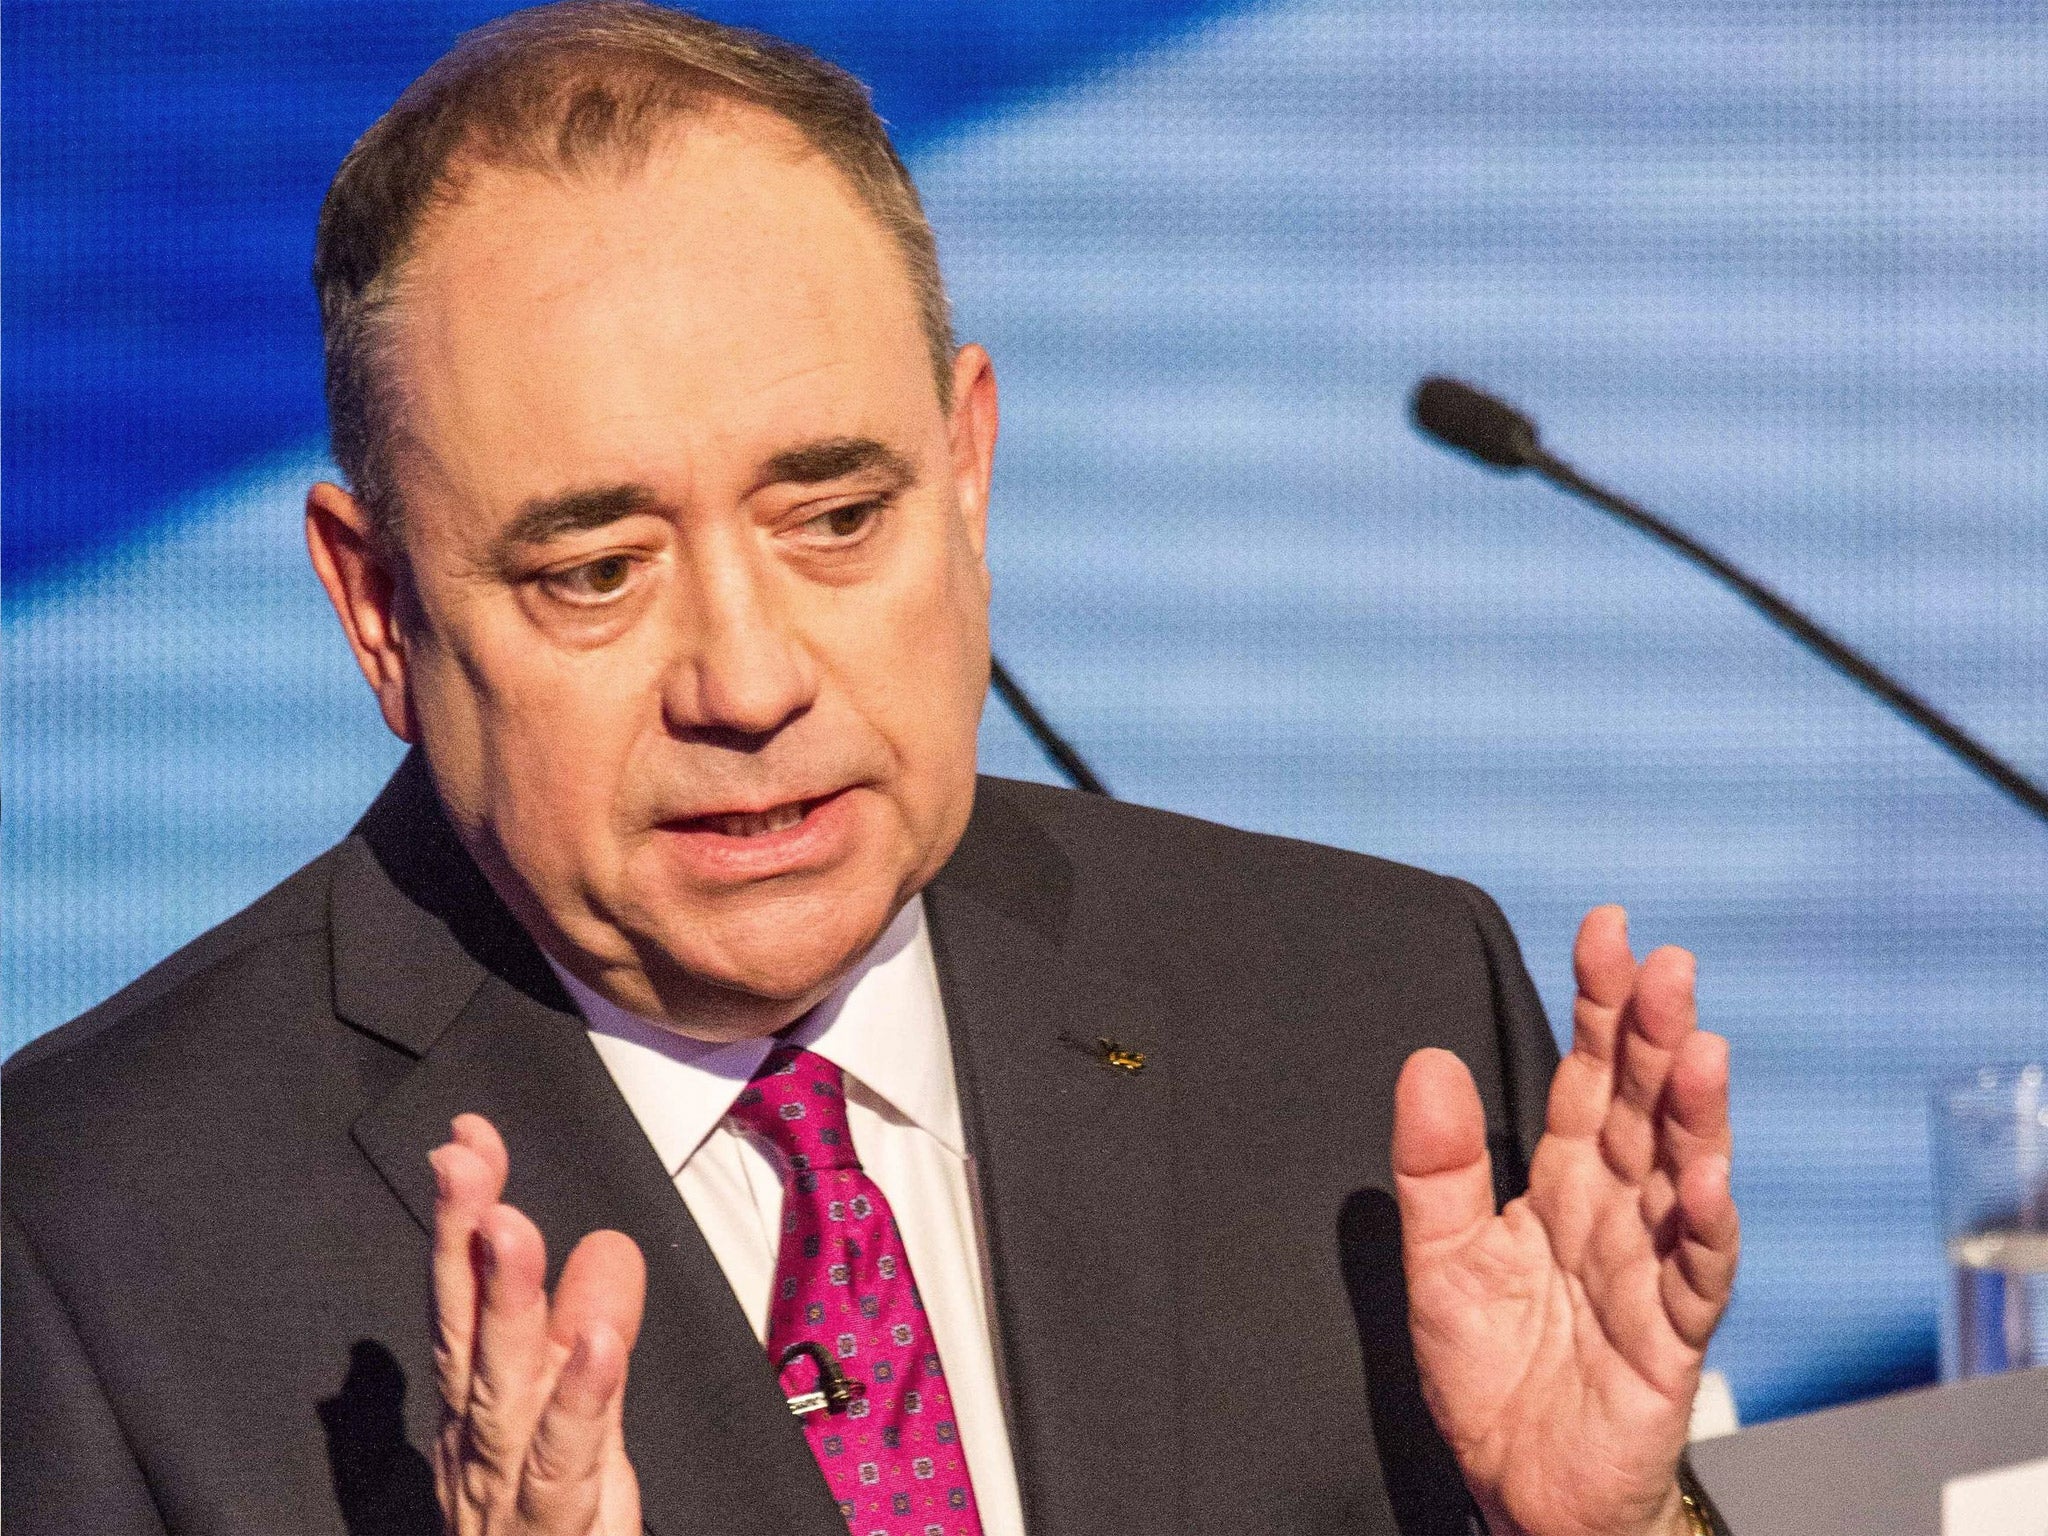 Alex Salmond makes a point during the debate